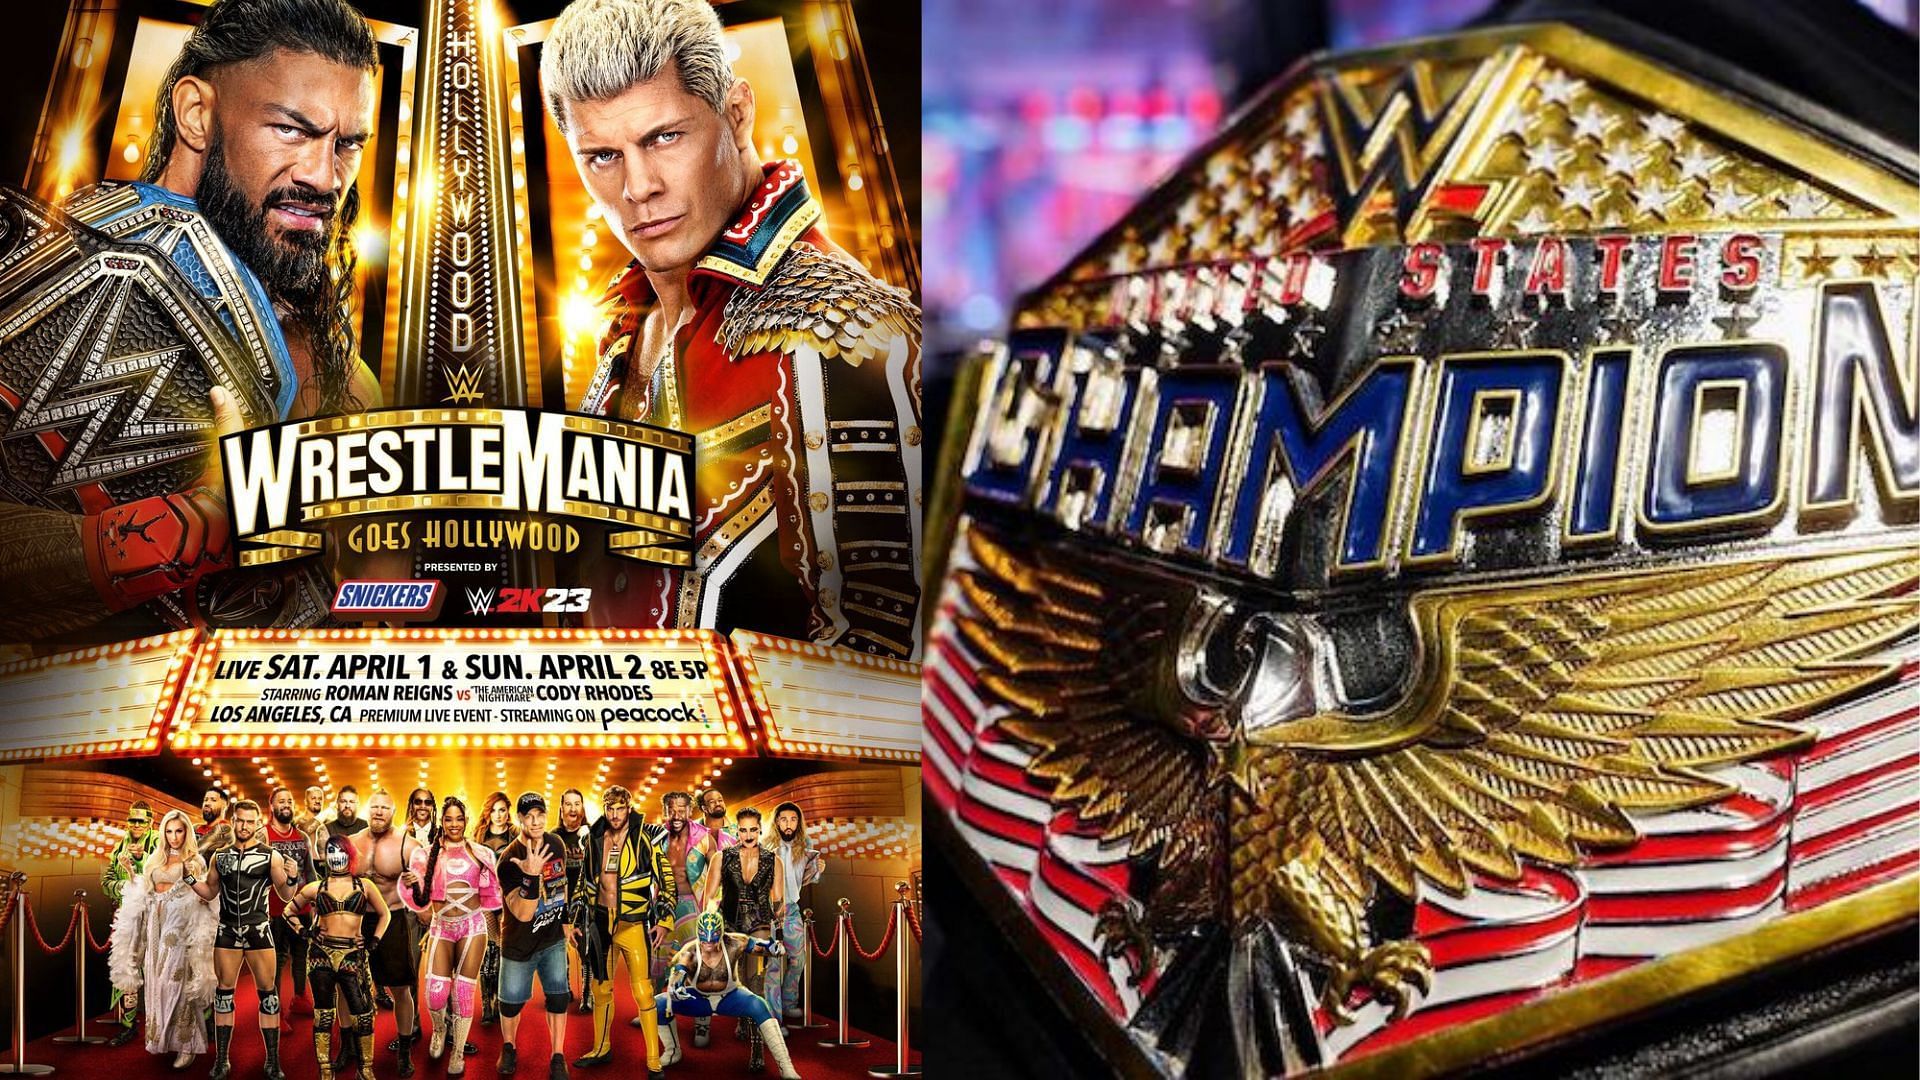 WWE WrestleMania Night One will be held on Saturday, April 1